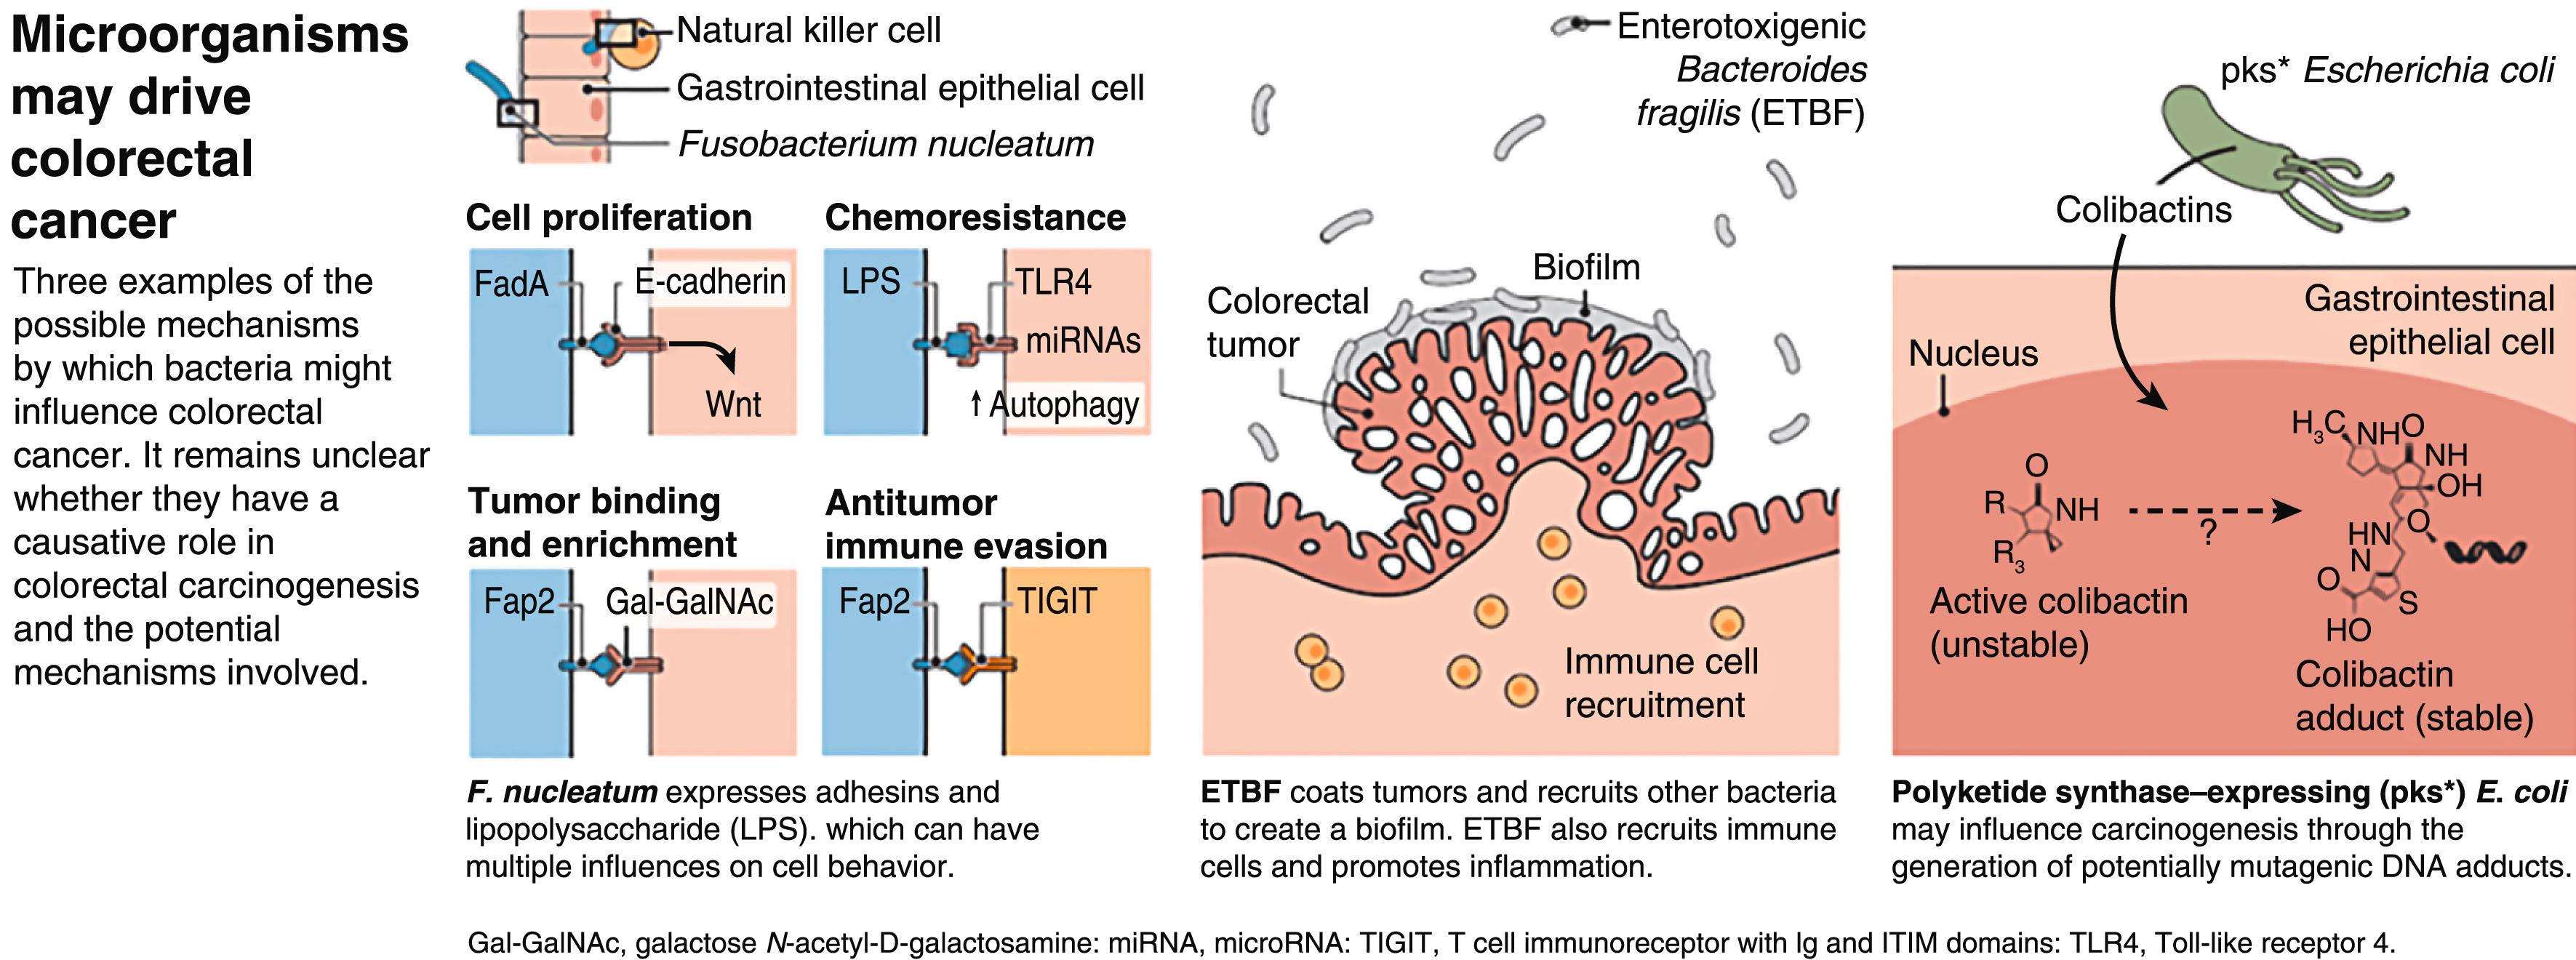 Figure 2.2, Possible mechanisms of interactions between microbiomes and colorectal carcinogenesis.